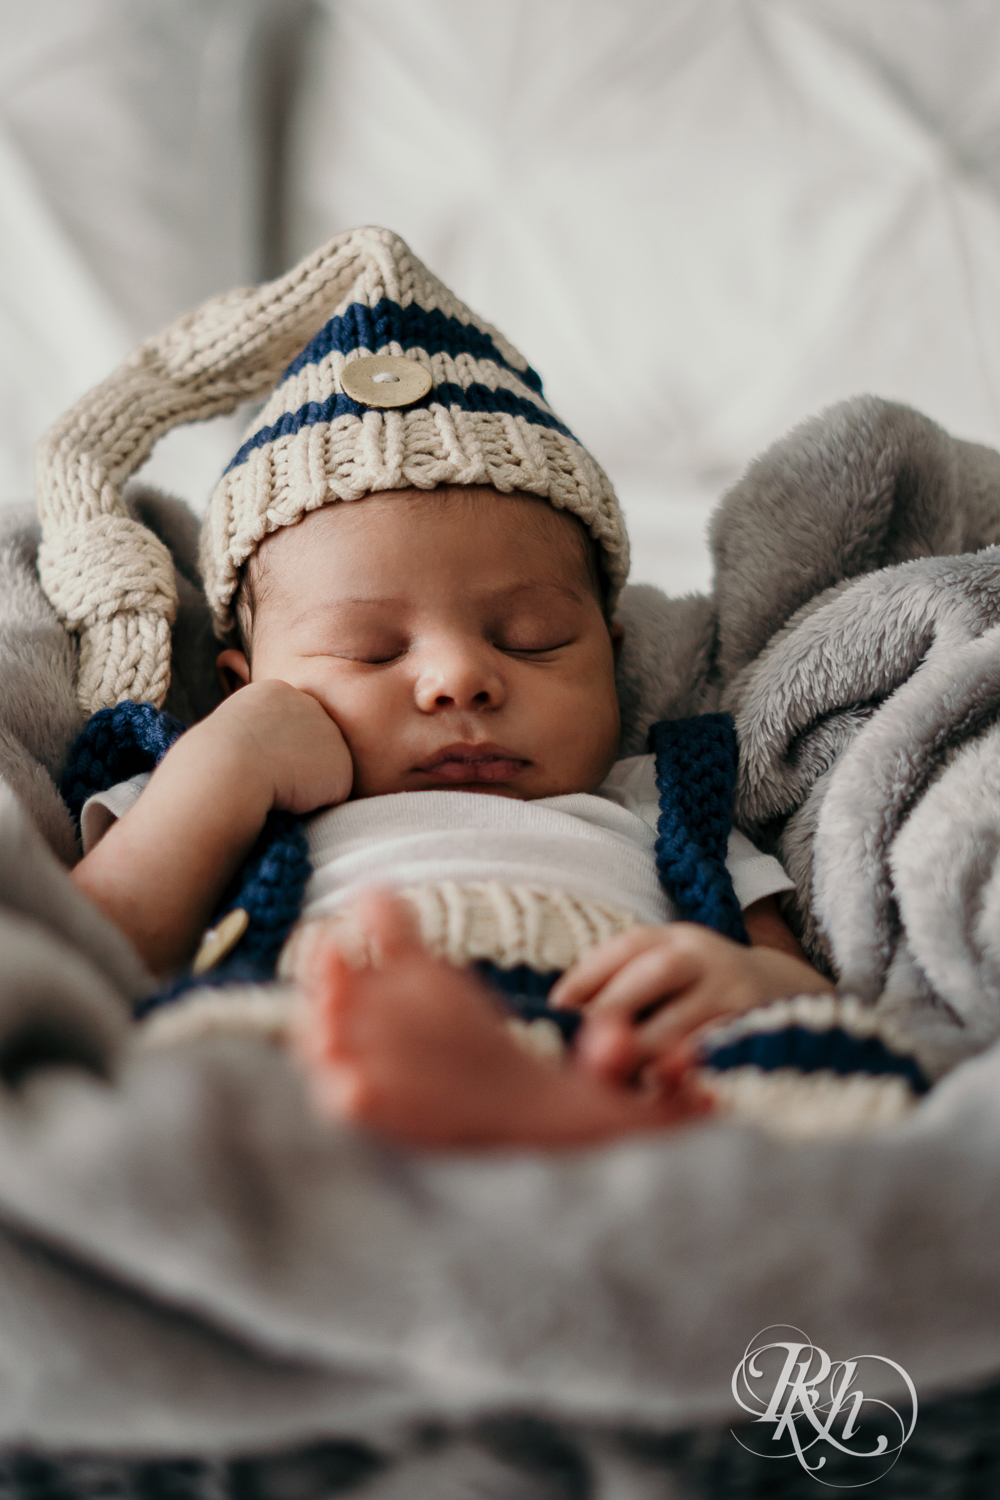 Biracial baby wearing knit cap sleeps on a bed in Burnsville, Minnesota at home.